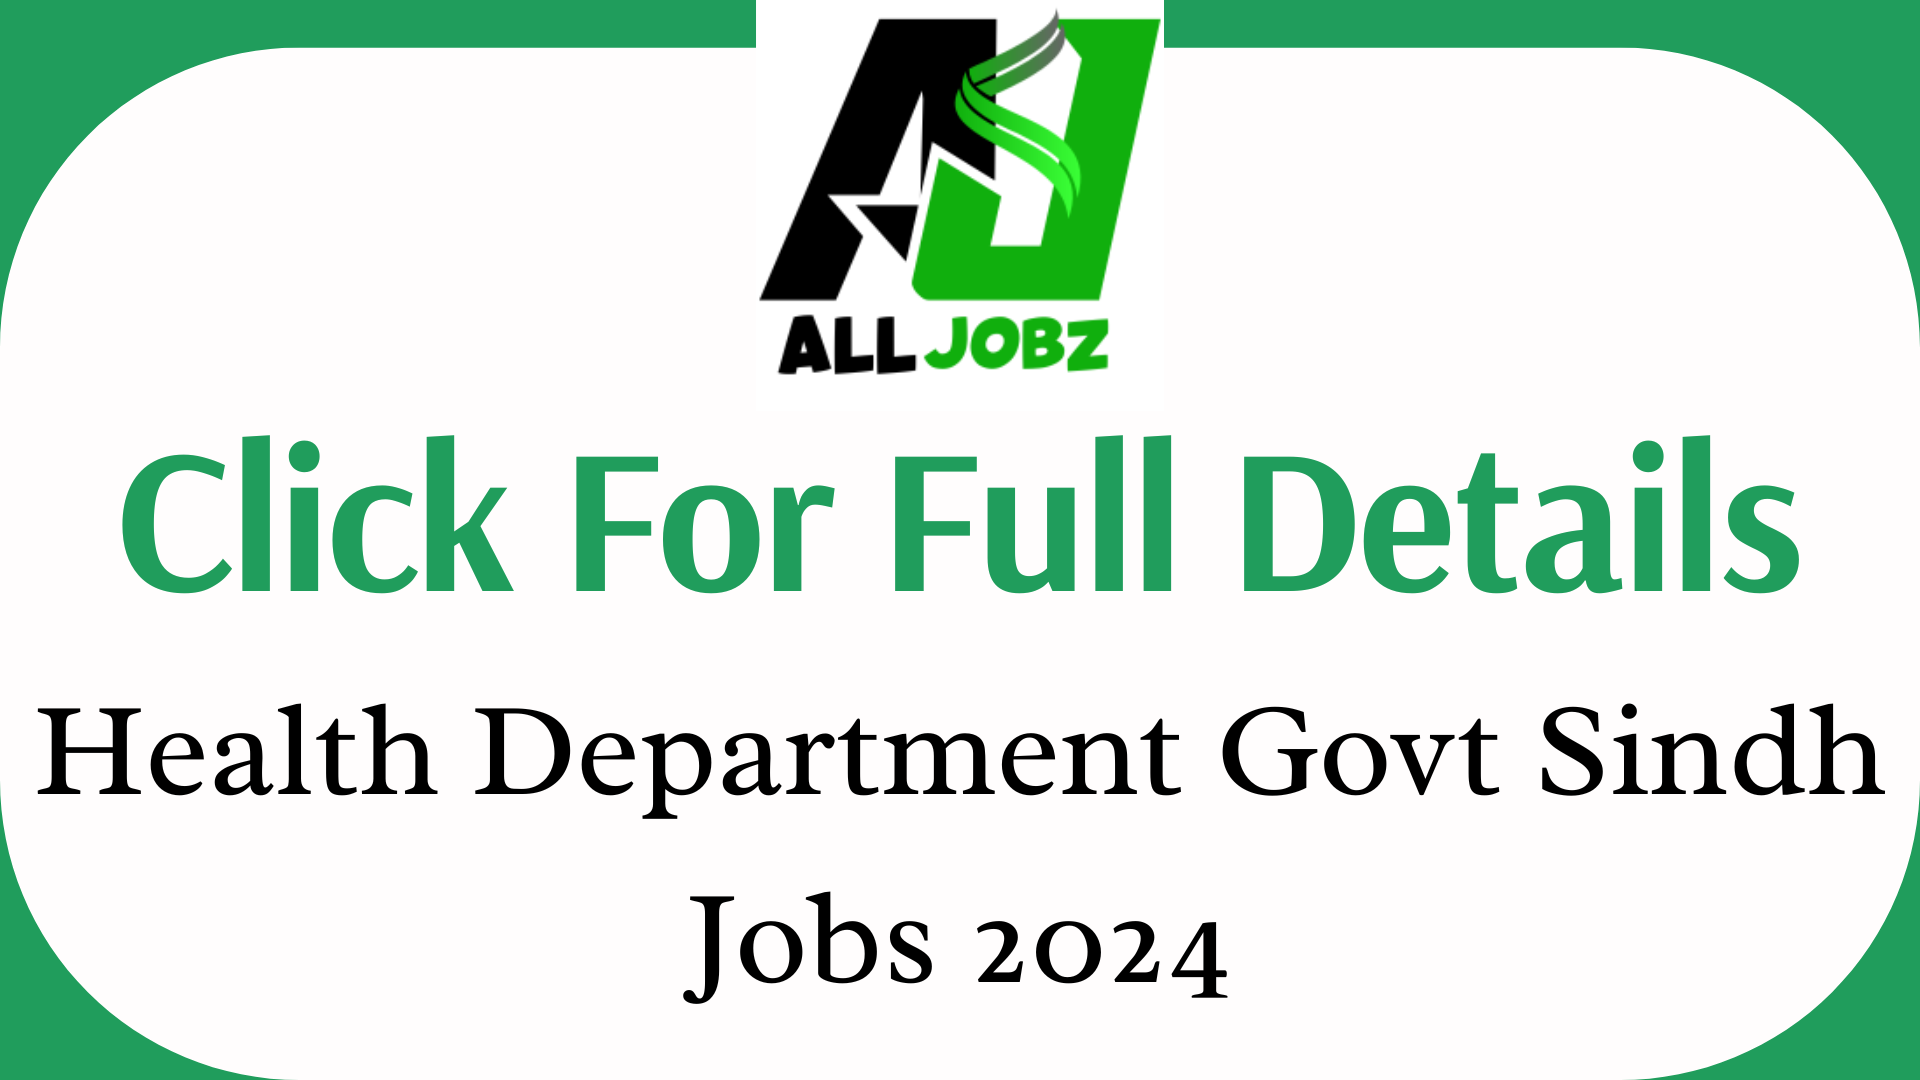 Government Sindh Health Department Surveillance And Research Specialist Jobs, Government Sindh Health Department Jobs Online Apply, Health Department Sindh Jobs 2024, Health Department Jobs Online Apply, Health Department Jobs Sindh Online Apply, Sindh Health Department Jobs 2024 Online Apply, Sindh Health Department Notification, Sindh Government Jobs All Department, Health Department Jobs Application Form,